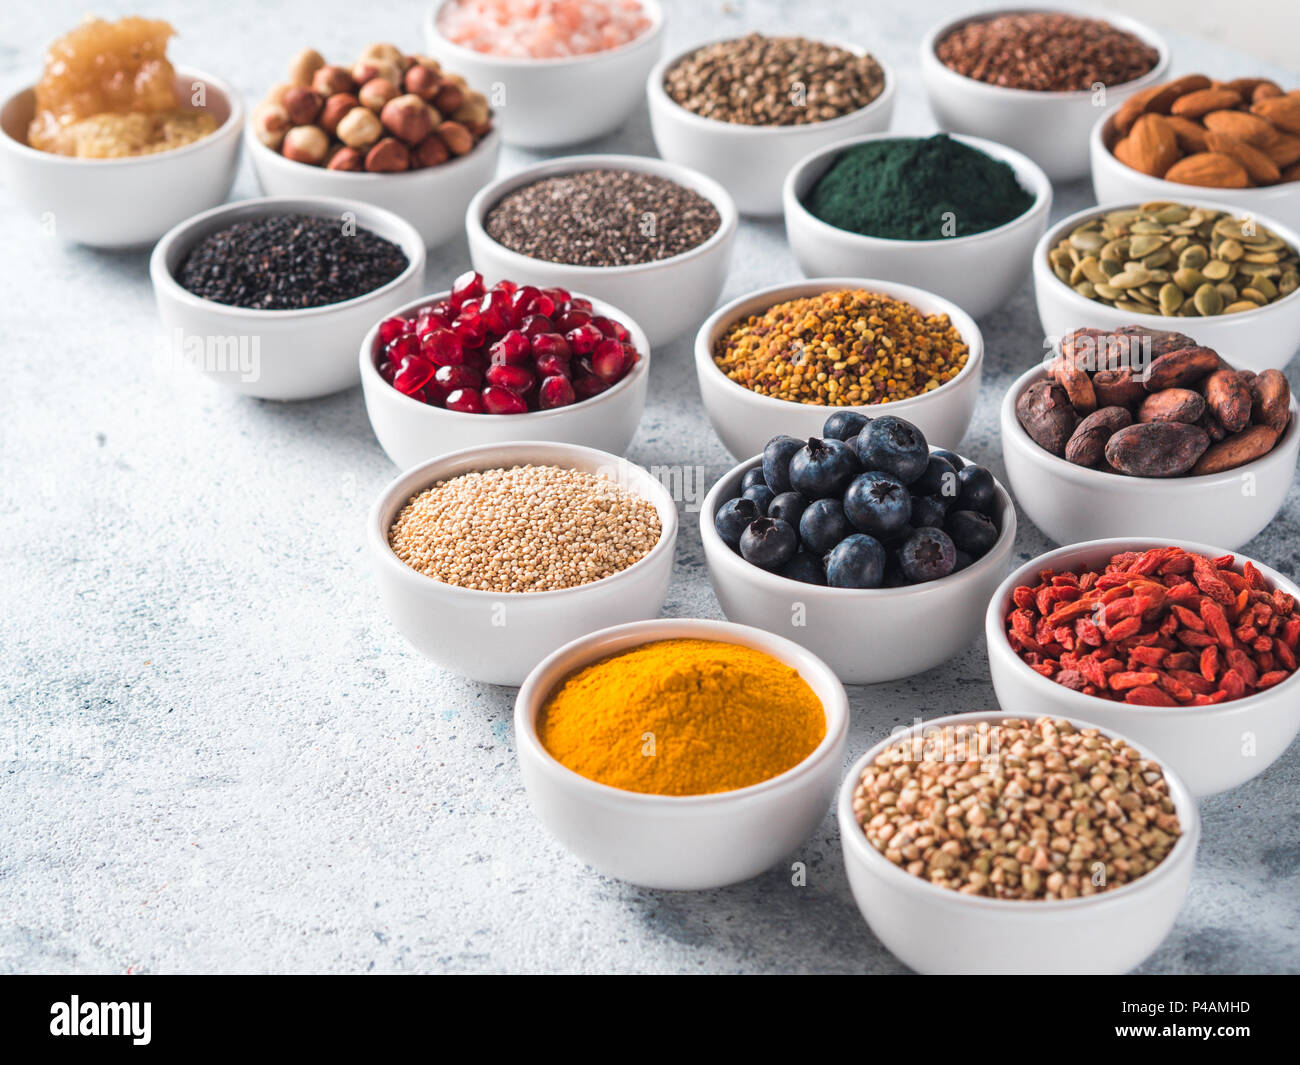 Various superfoods in smal bowl gray concrete background. Superfood as chia, spirulina, raw cocoa bean, goji, hemp, quinoa, bee pollen, black sesame, turmeric. Copy space for text. Stock Photo